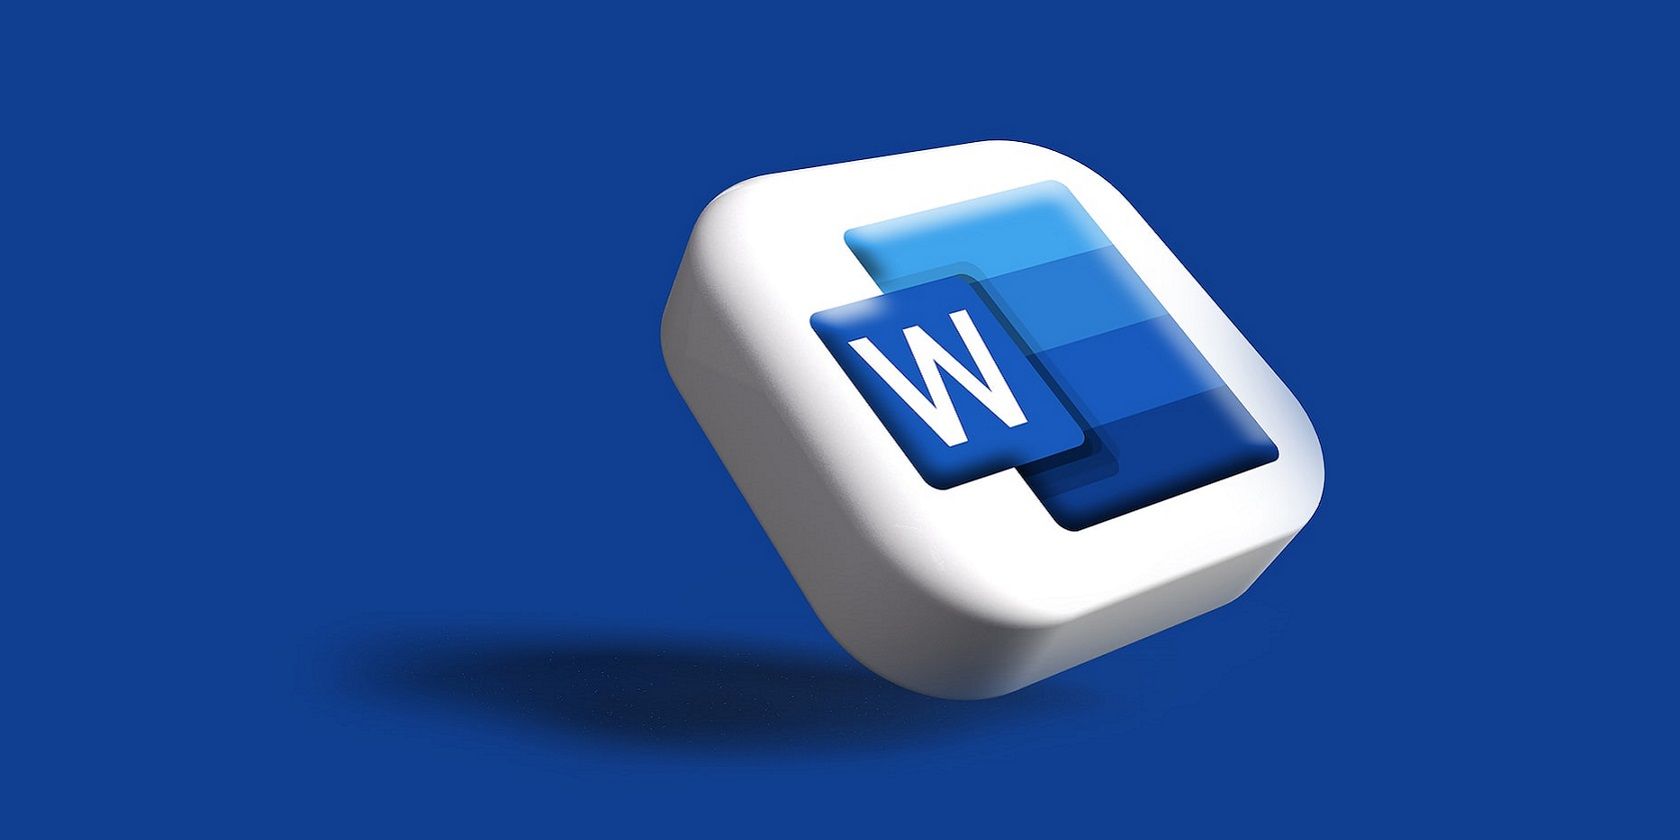 The Microsoft Word logo on a blue background